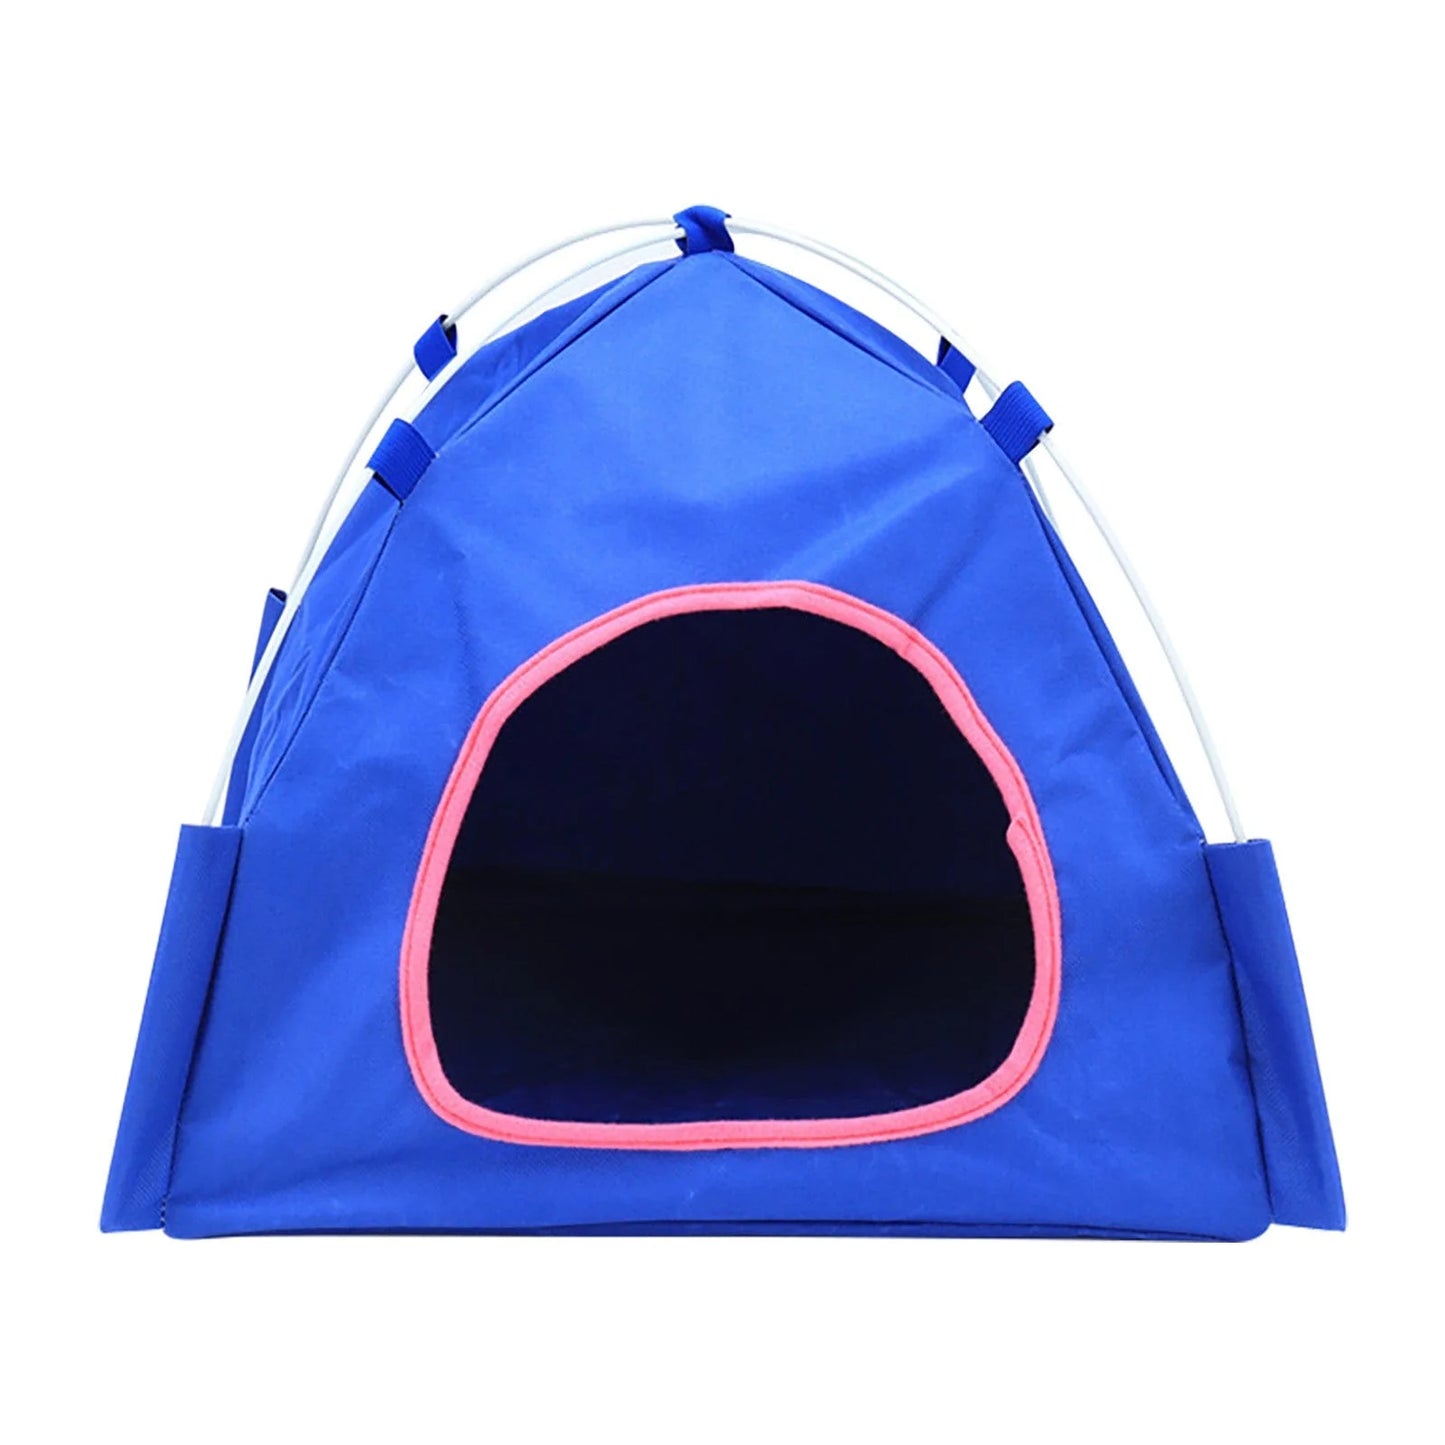 〖Hellobye〗Breathable Washable Pet Puppy Kennel Dog Cat Folding Indoor Outdoor House Bed